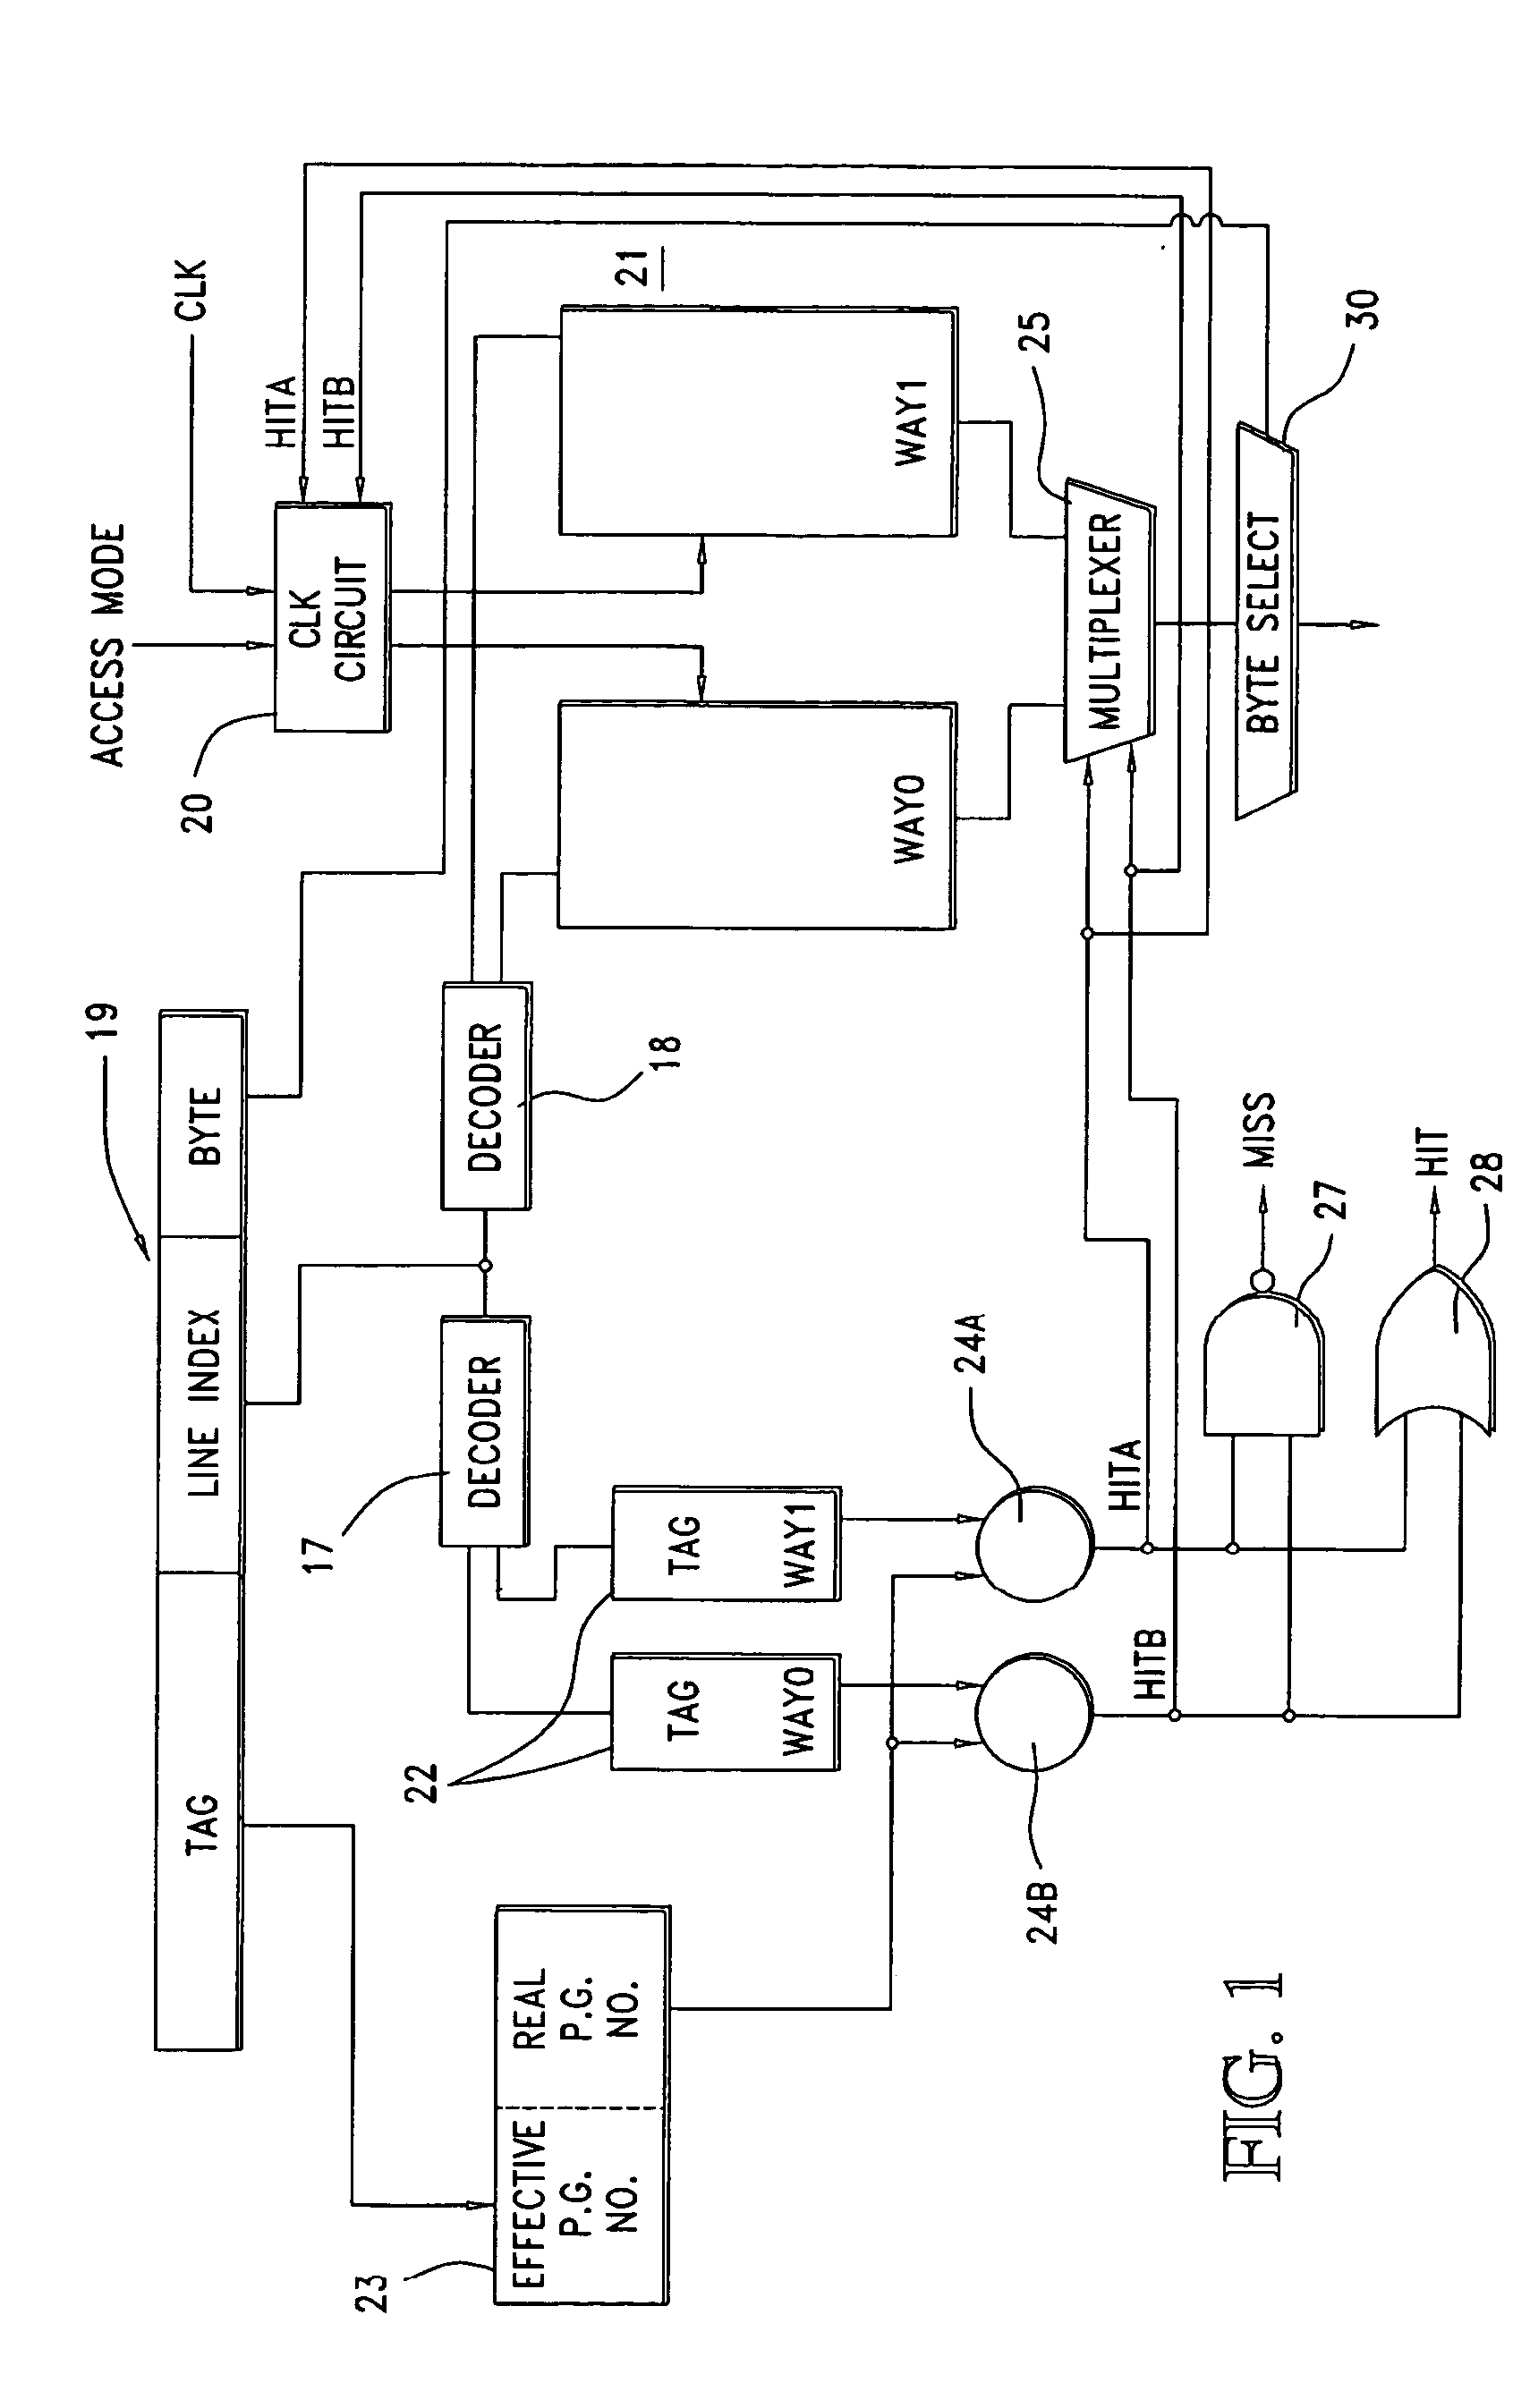 Method and system for providing cache set selection which is power optimized